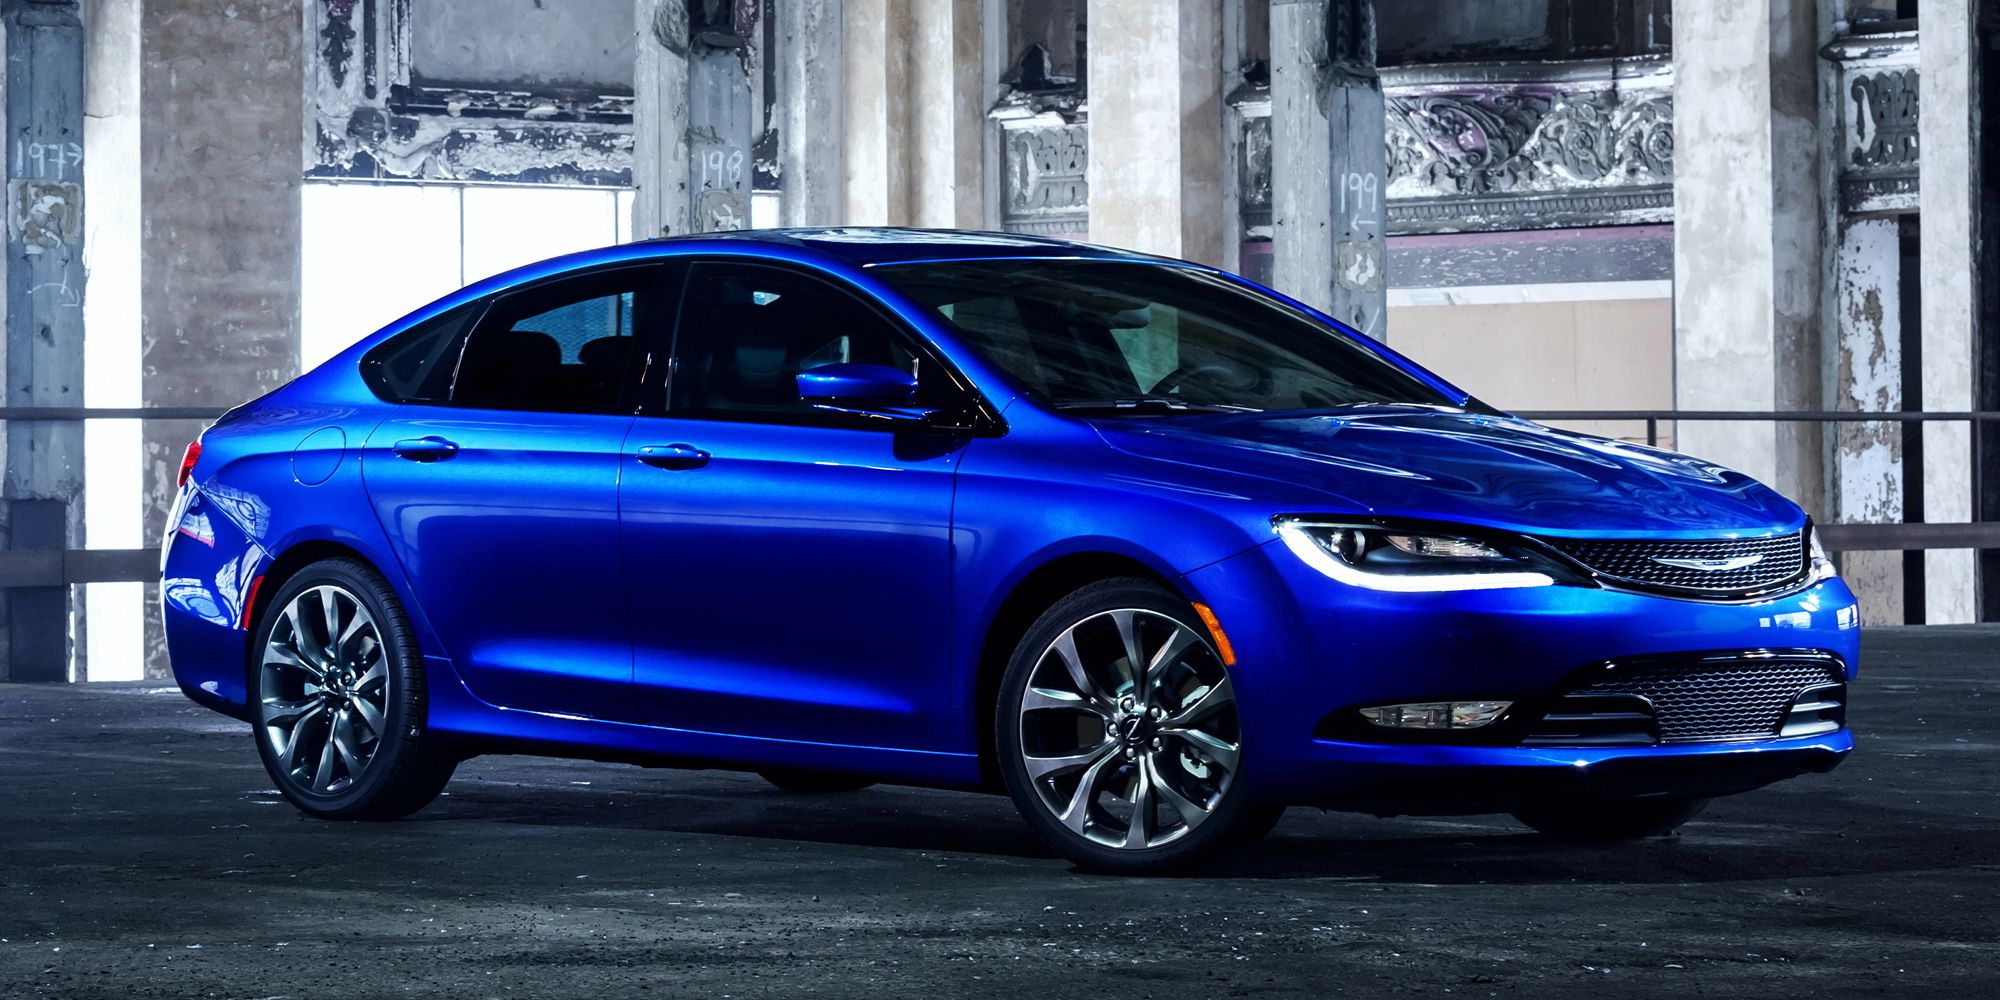 Front 3/4 view of the Chrysler 200